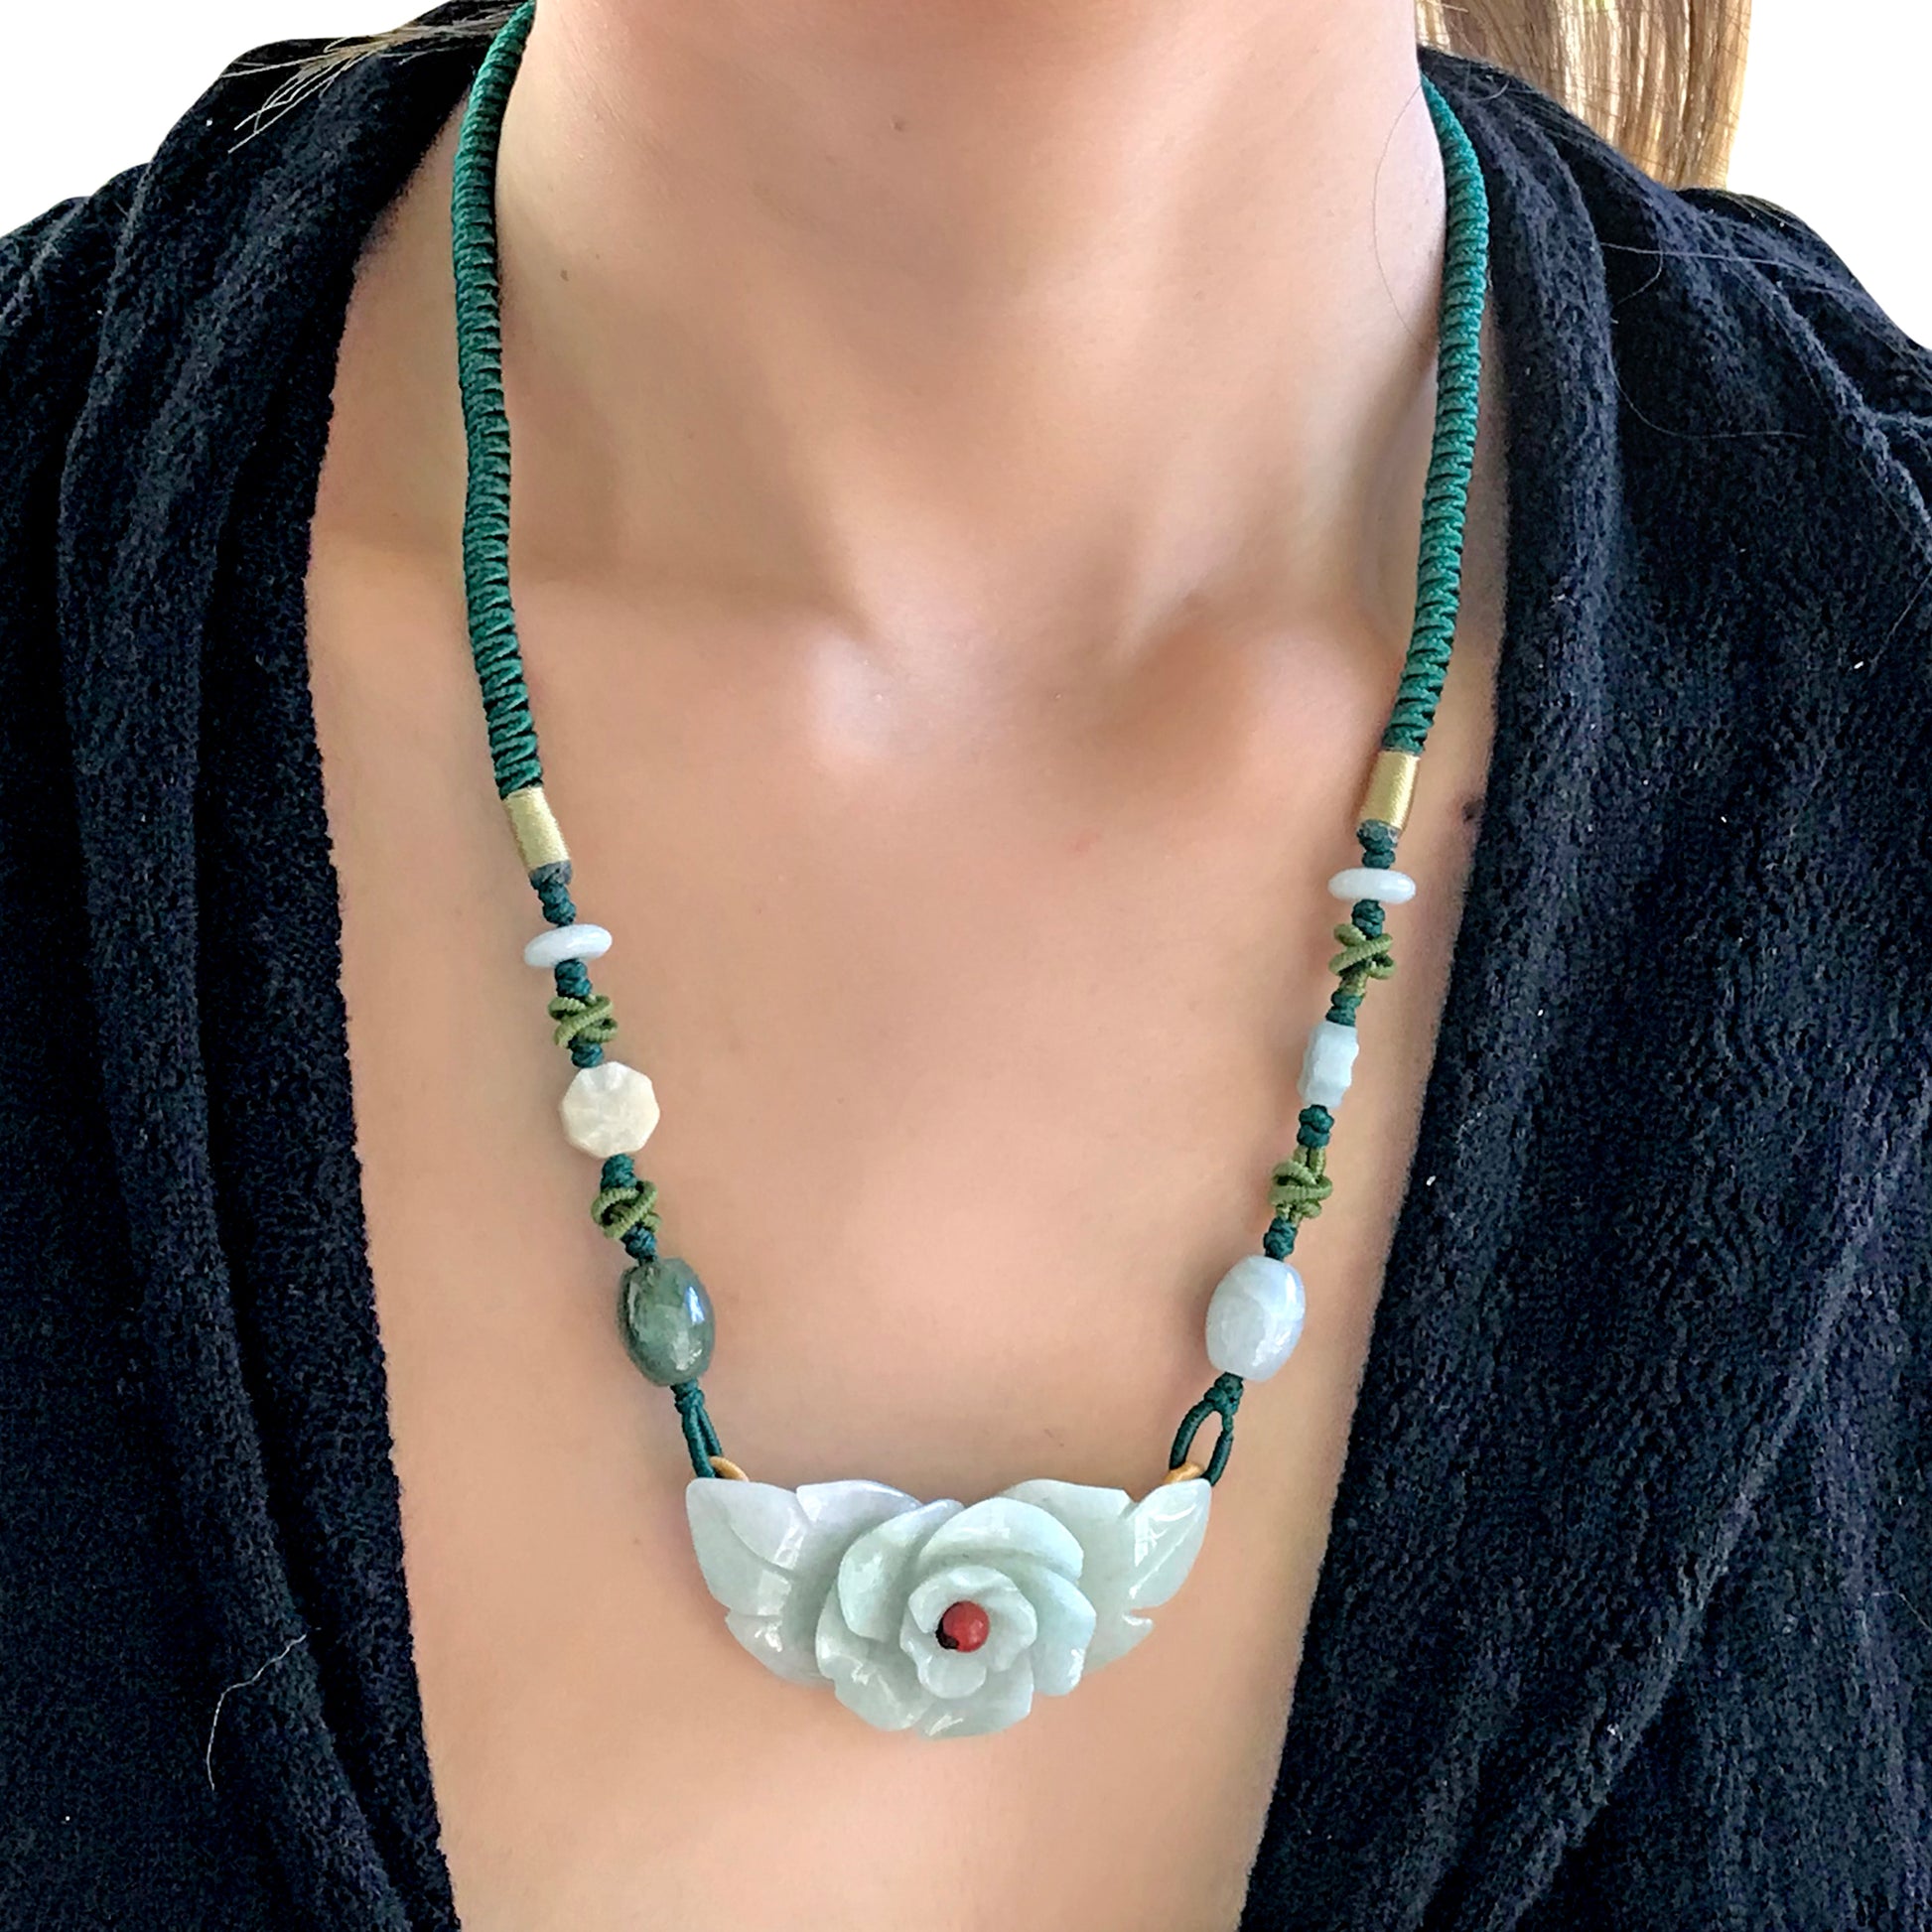 Get Your Love Story Started with Rose Jade Necklace made with green Cord